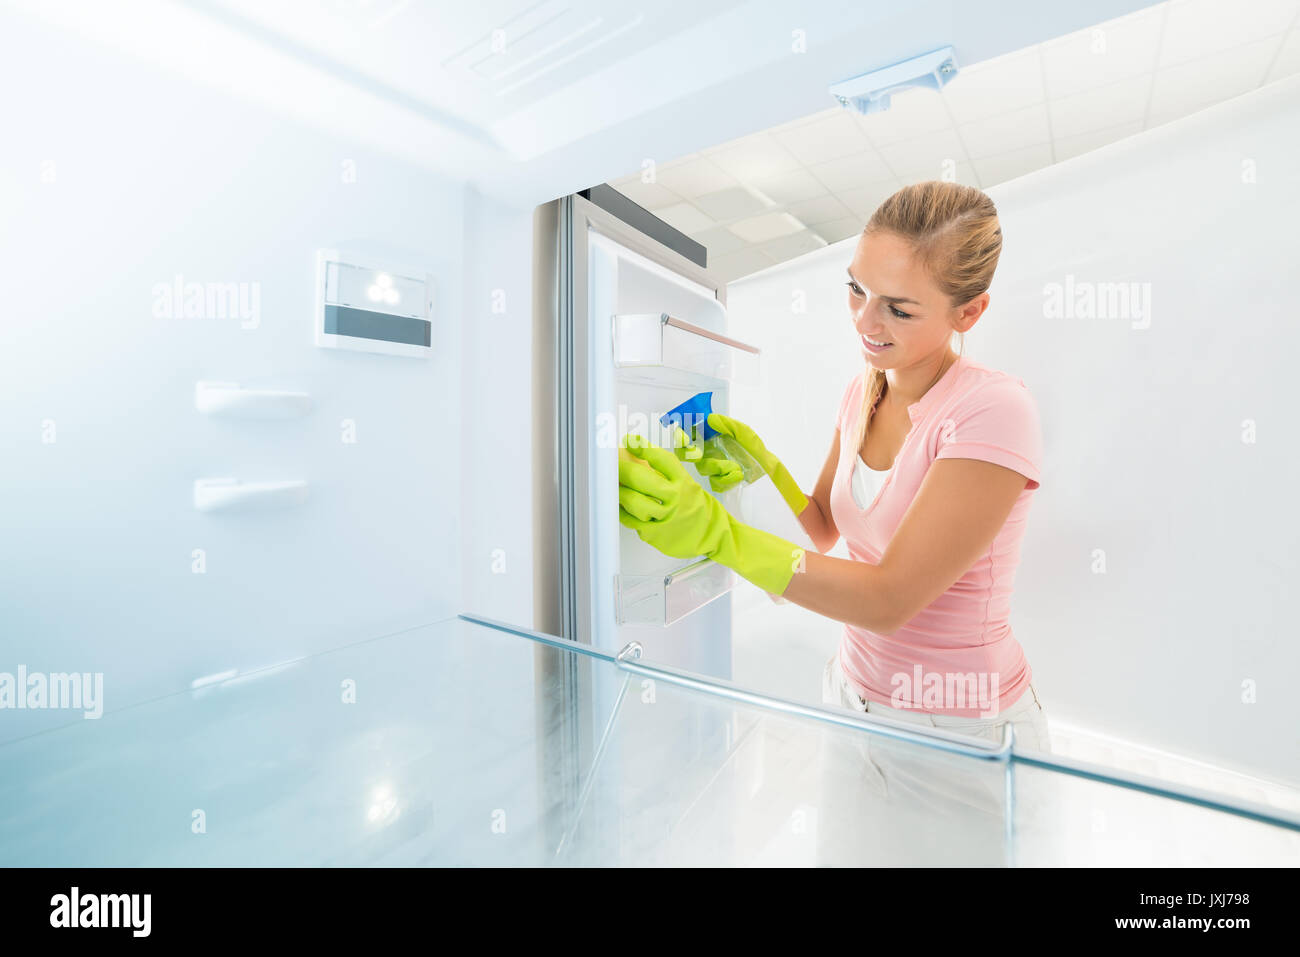 Cleaning Service Professional Woman Cleaning Inside The Refrigerator With Spray Bottle And Sponge Stock Photo